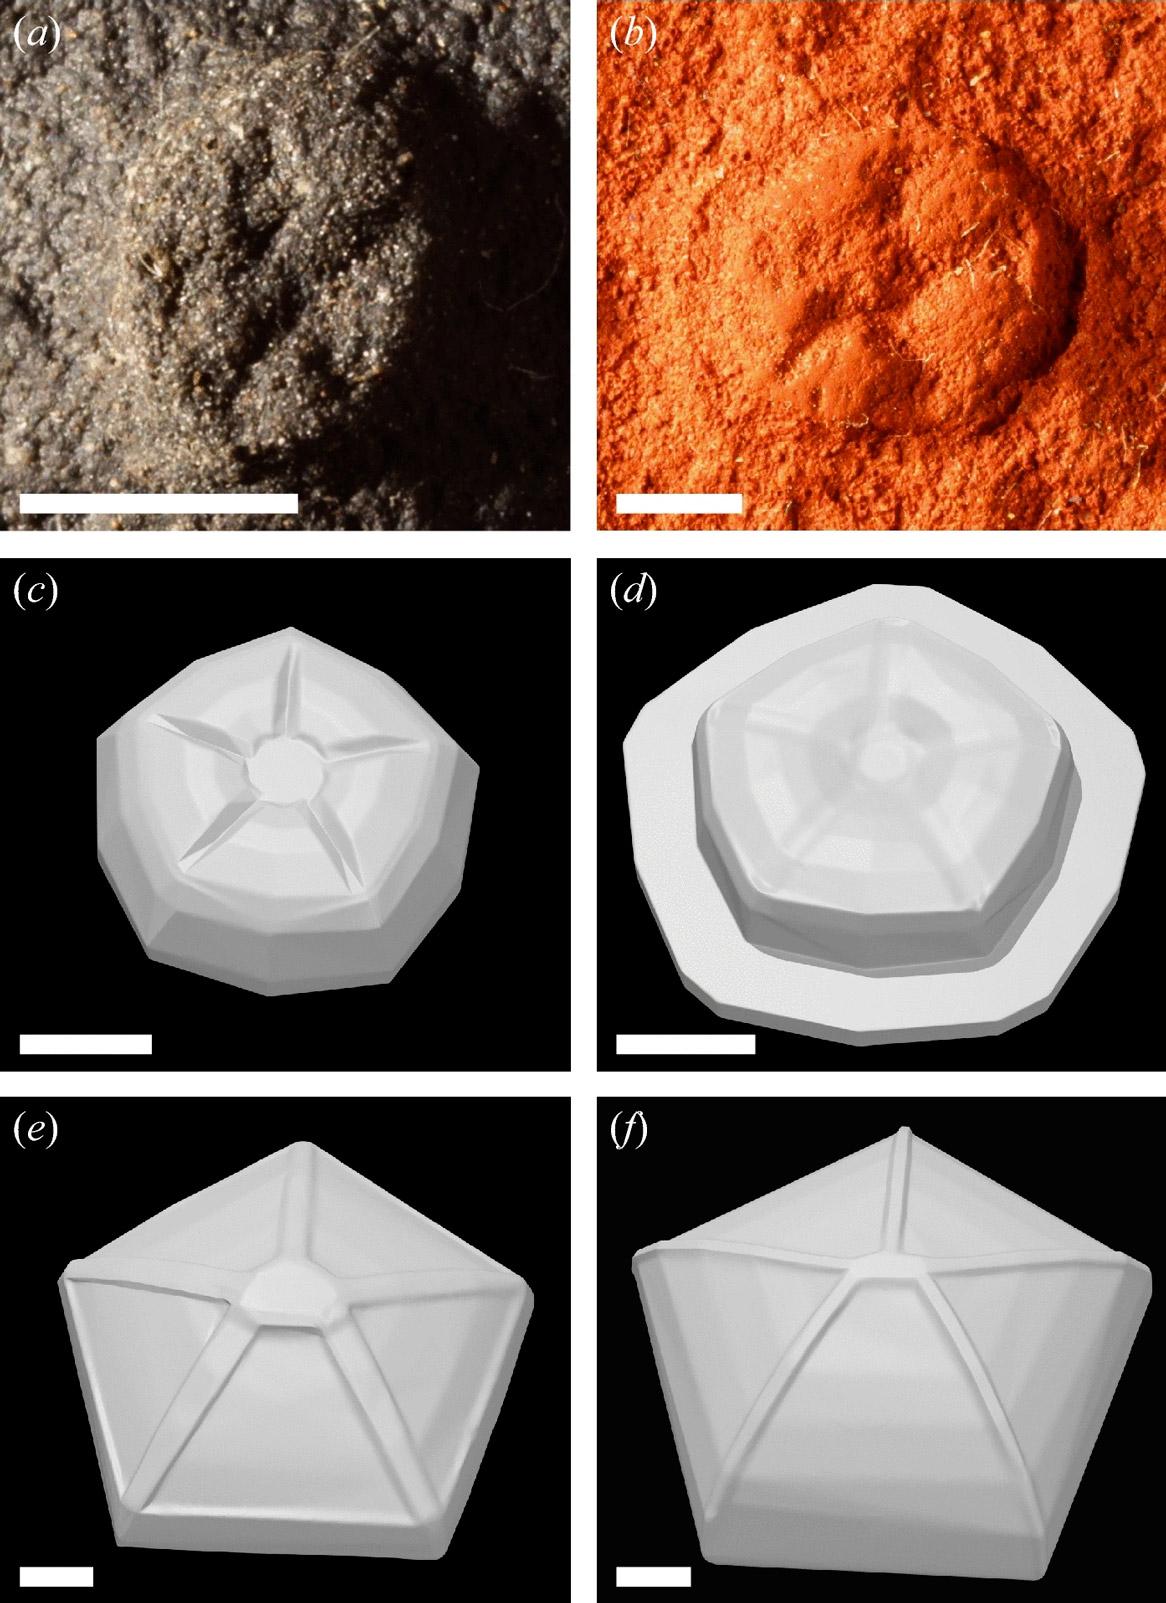 Top - Fossil moulds of Arkarua adami from Devil's Peak and Chace Range, Flinders Ranges; Middle - 3D models of small and large Arkarua from the Flinders Ranges; Bottom - Cambrian echinoderm models used for comparison in the study. Scale bars = 2 mm.